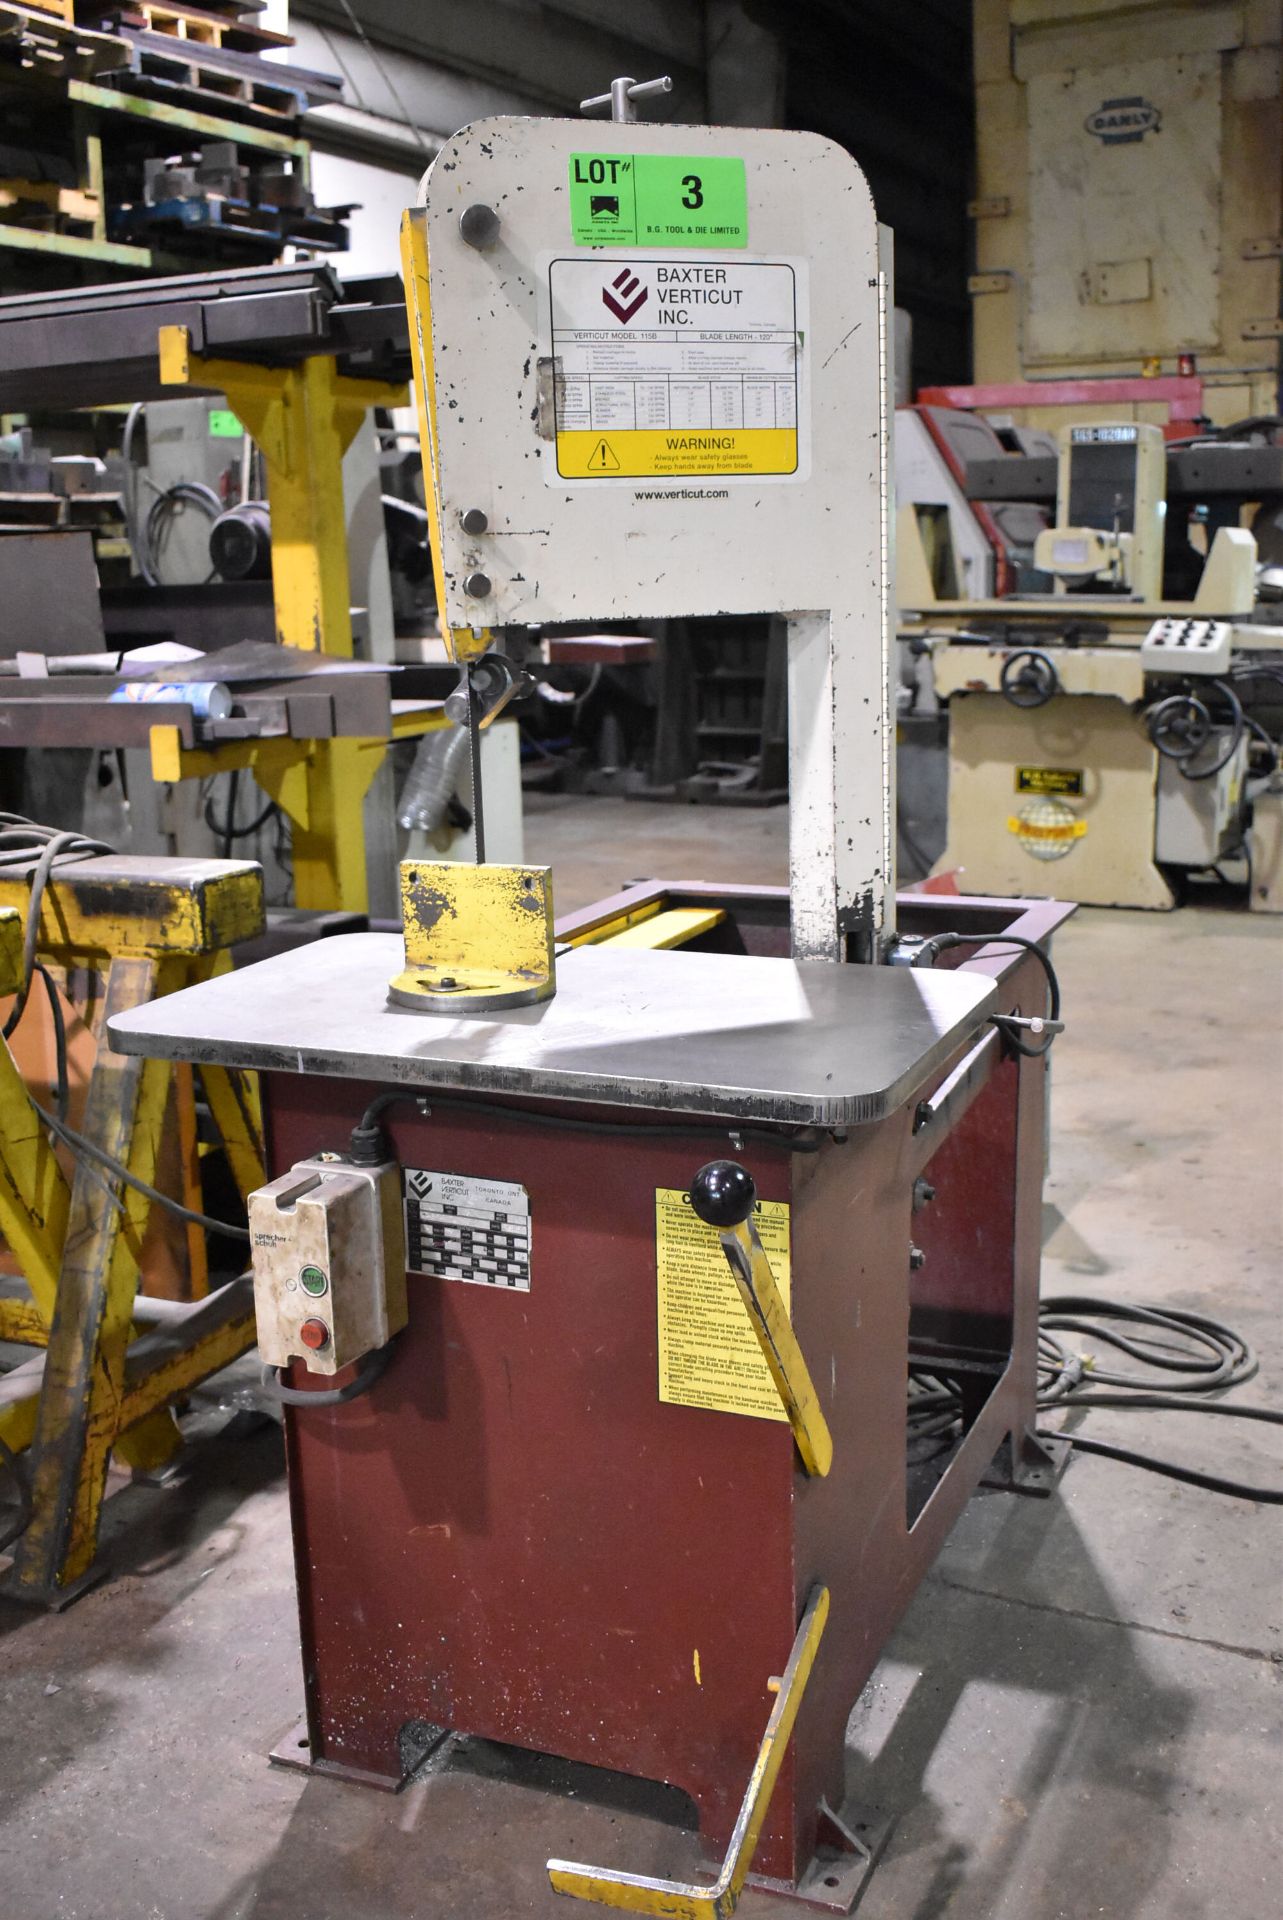 BAXTER VERTICUT MODEL 115B ROLL-IN VERTICAL BAND SAW WITH 18"X30" TABLE, 13" THROAT, 12" MAX.